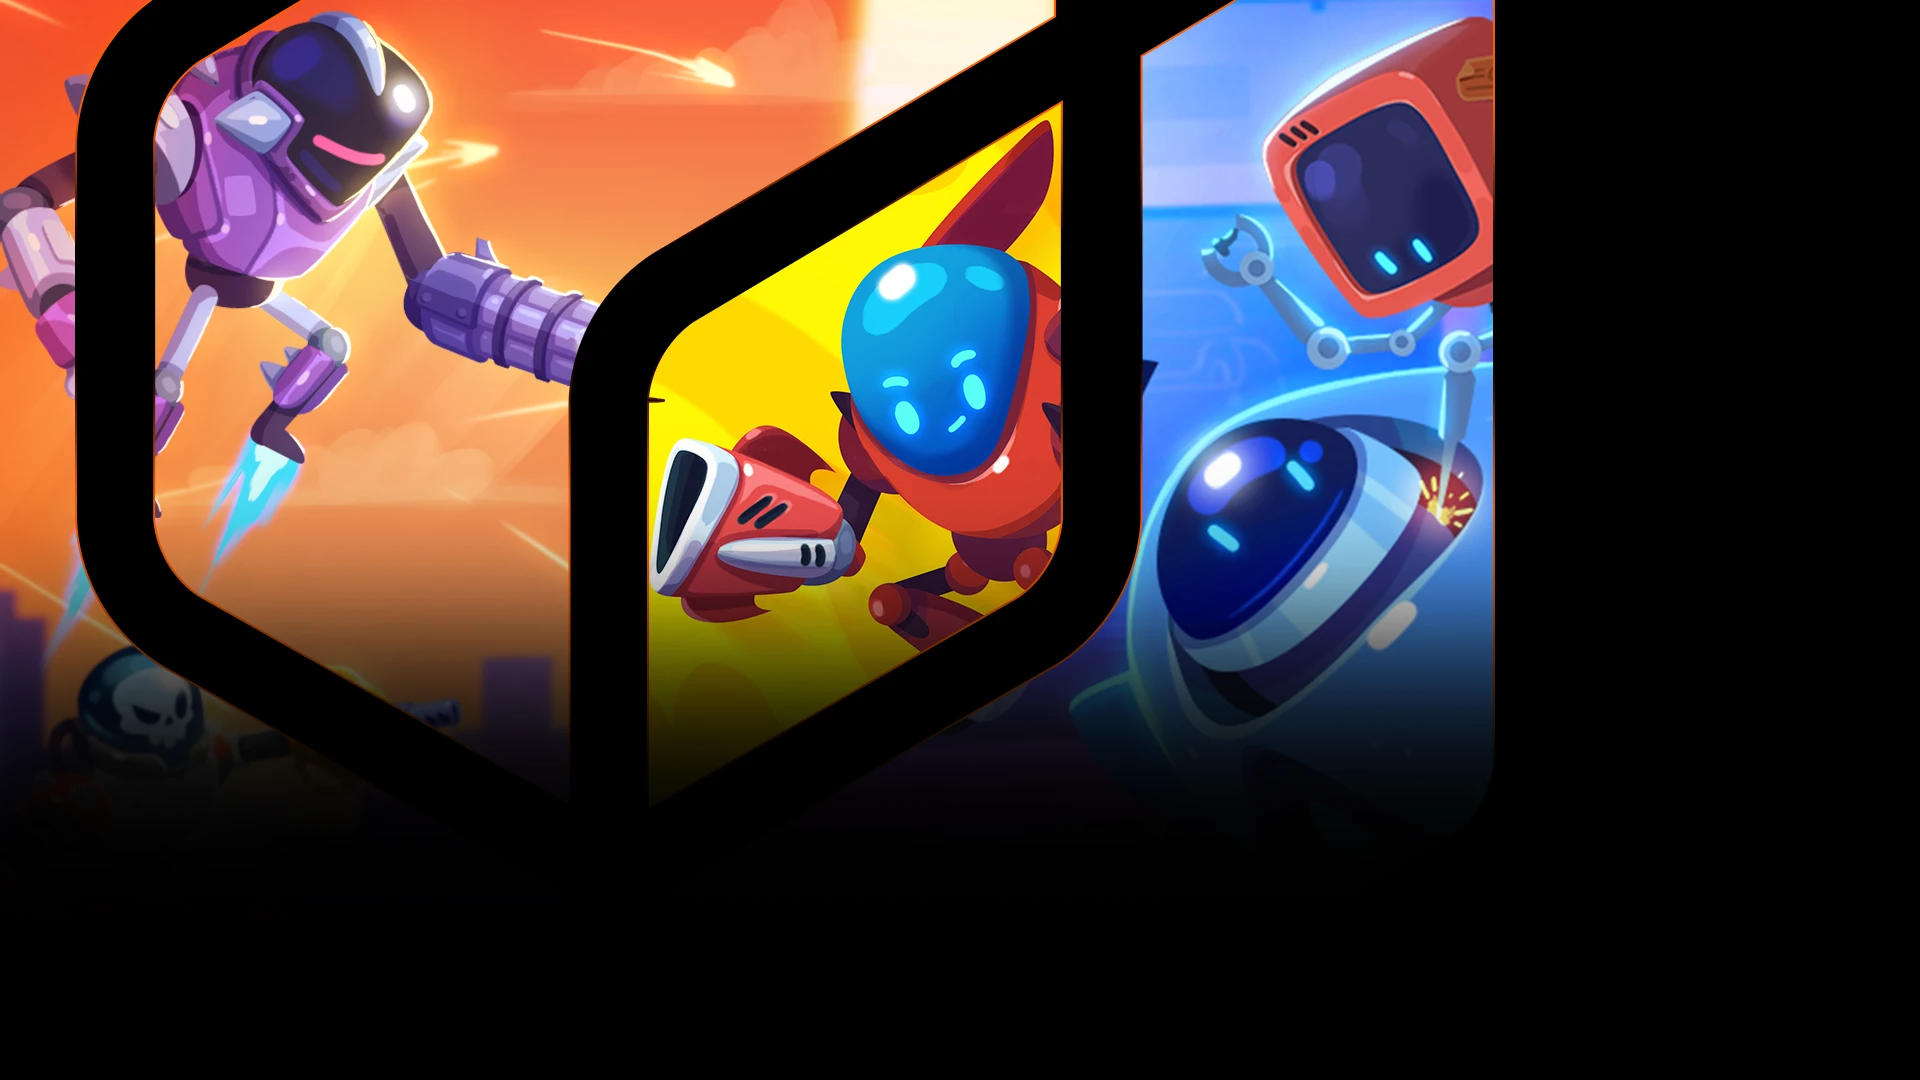 <span style="text-align: center;">Robo Wars</br><span class="mgm-outline">Mobile Game<span></span>